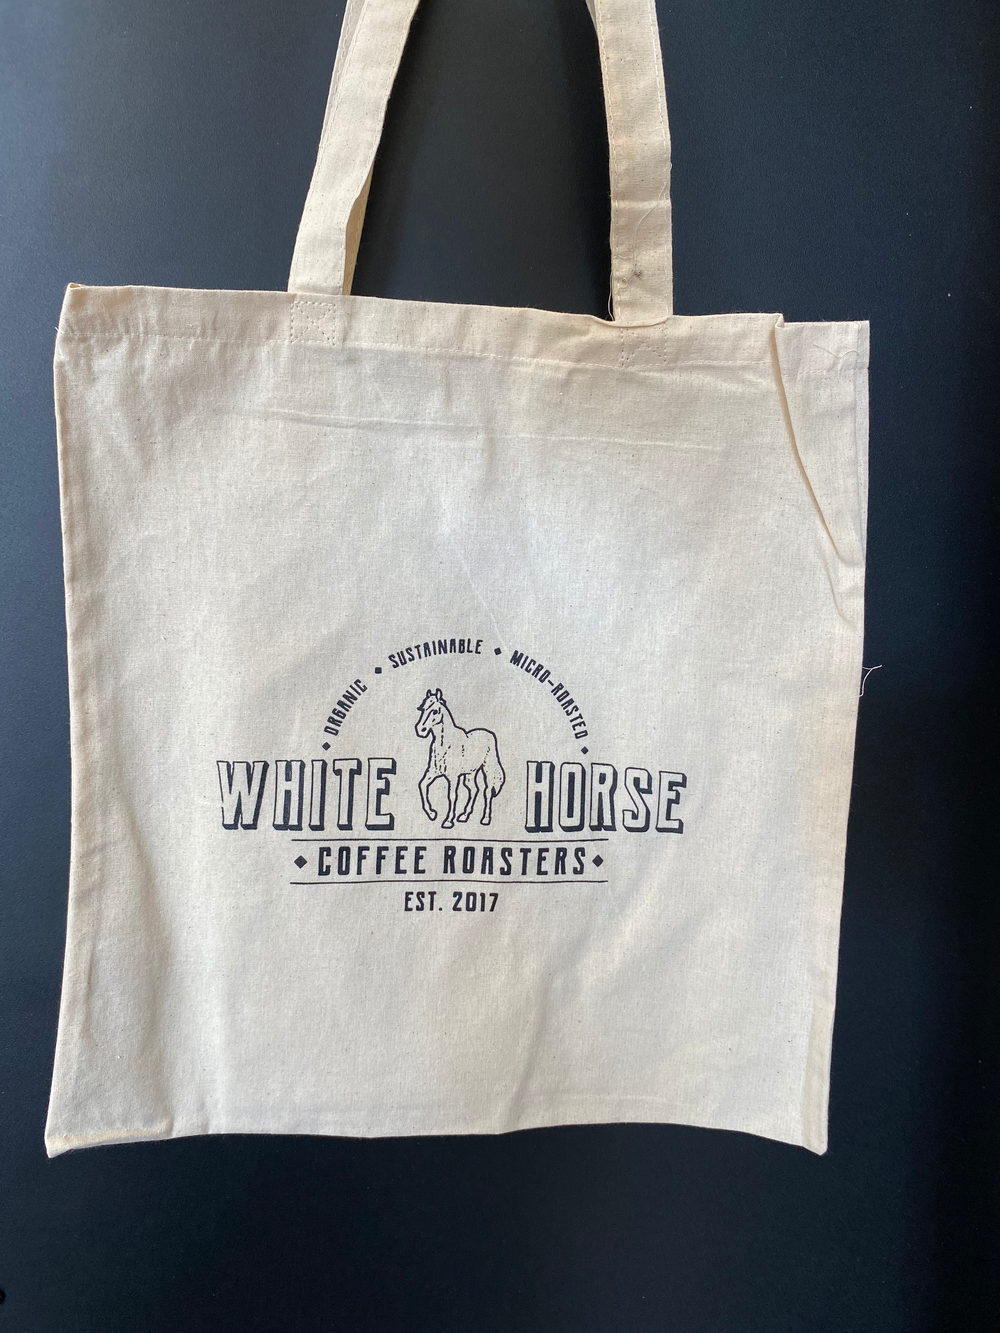 White Horse Tote Bag Exclusive - Perfect for coffee enthusiasts, this merch makes for the ultimate gift from White Horse Coffee Roasters.